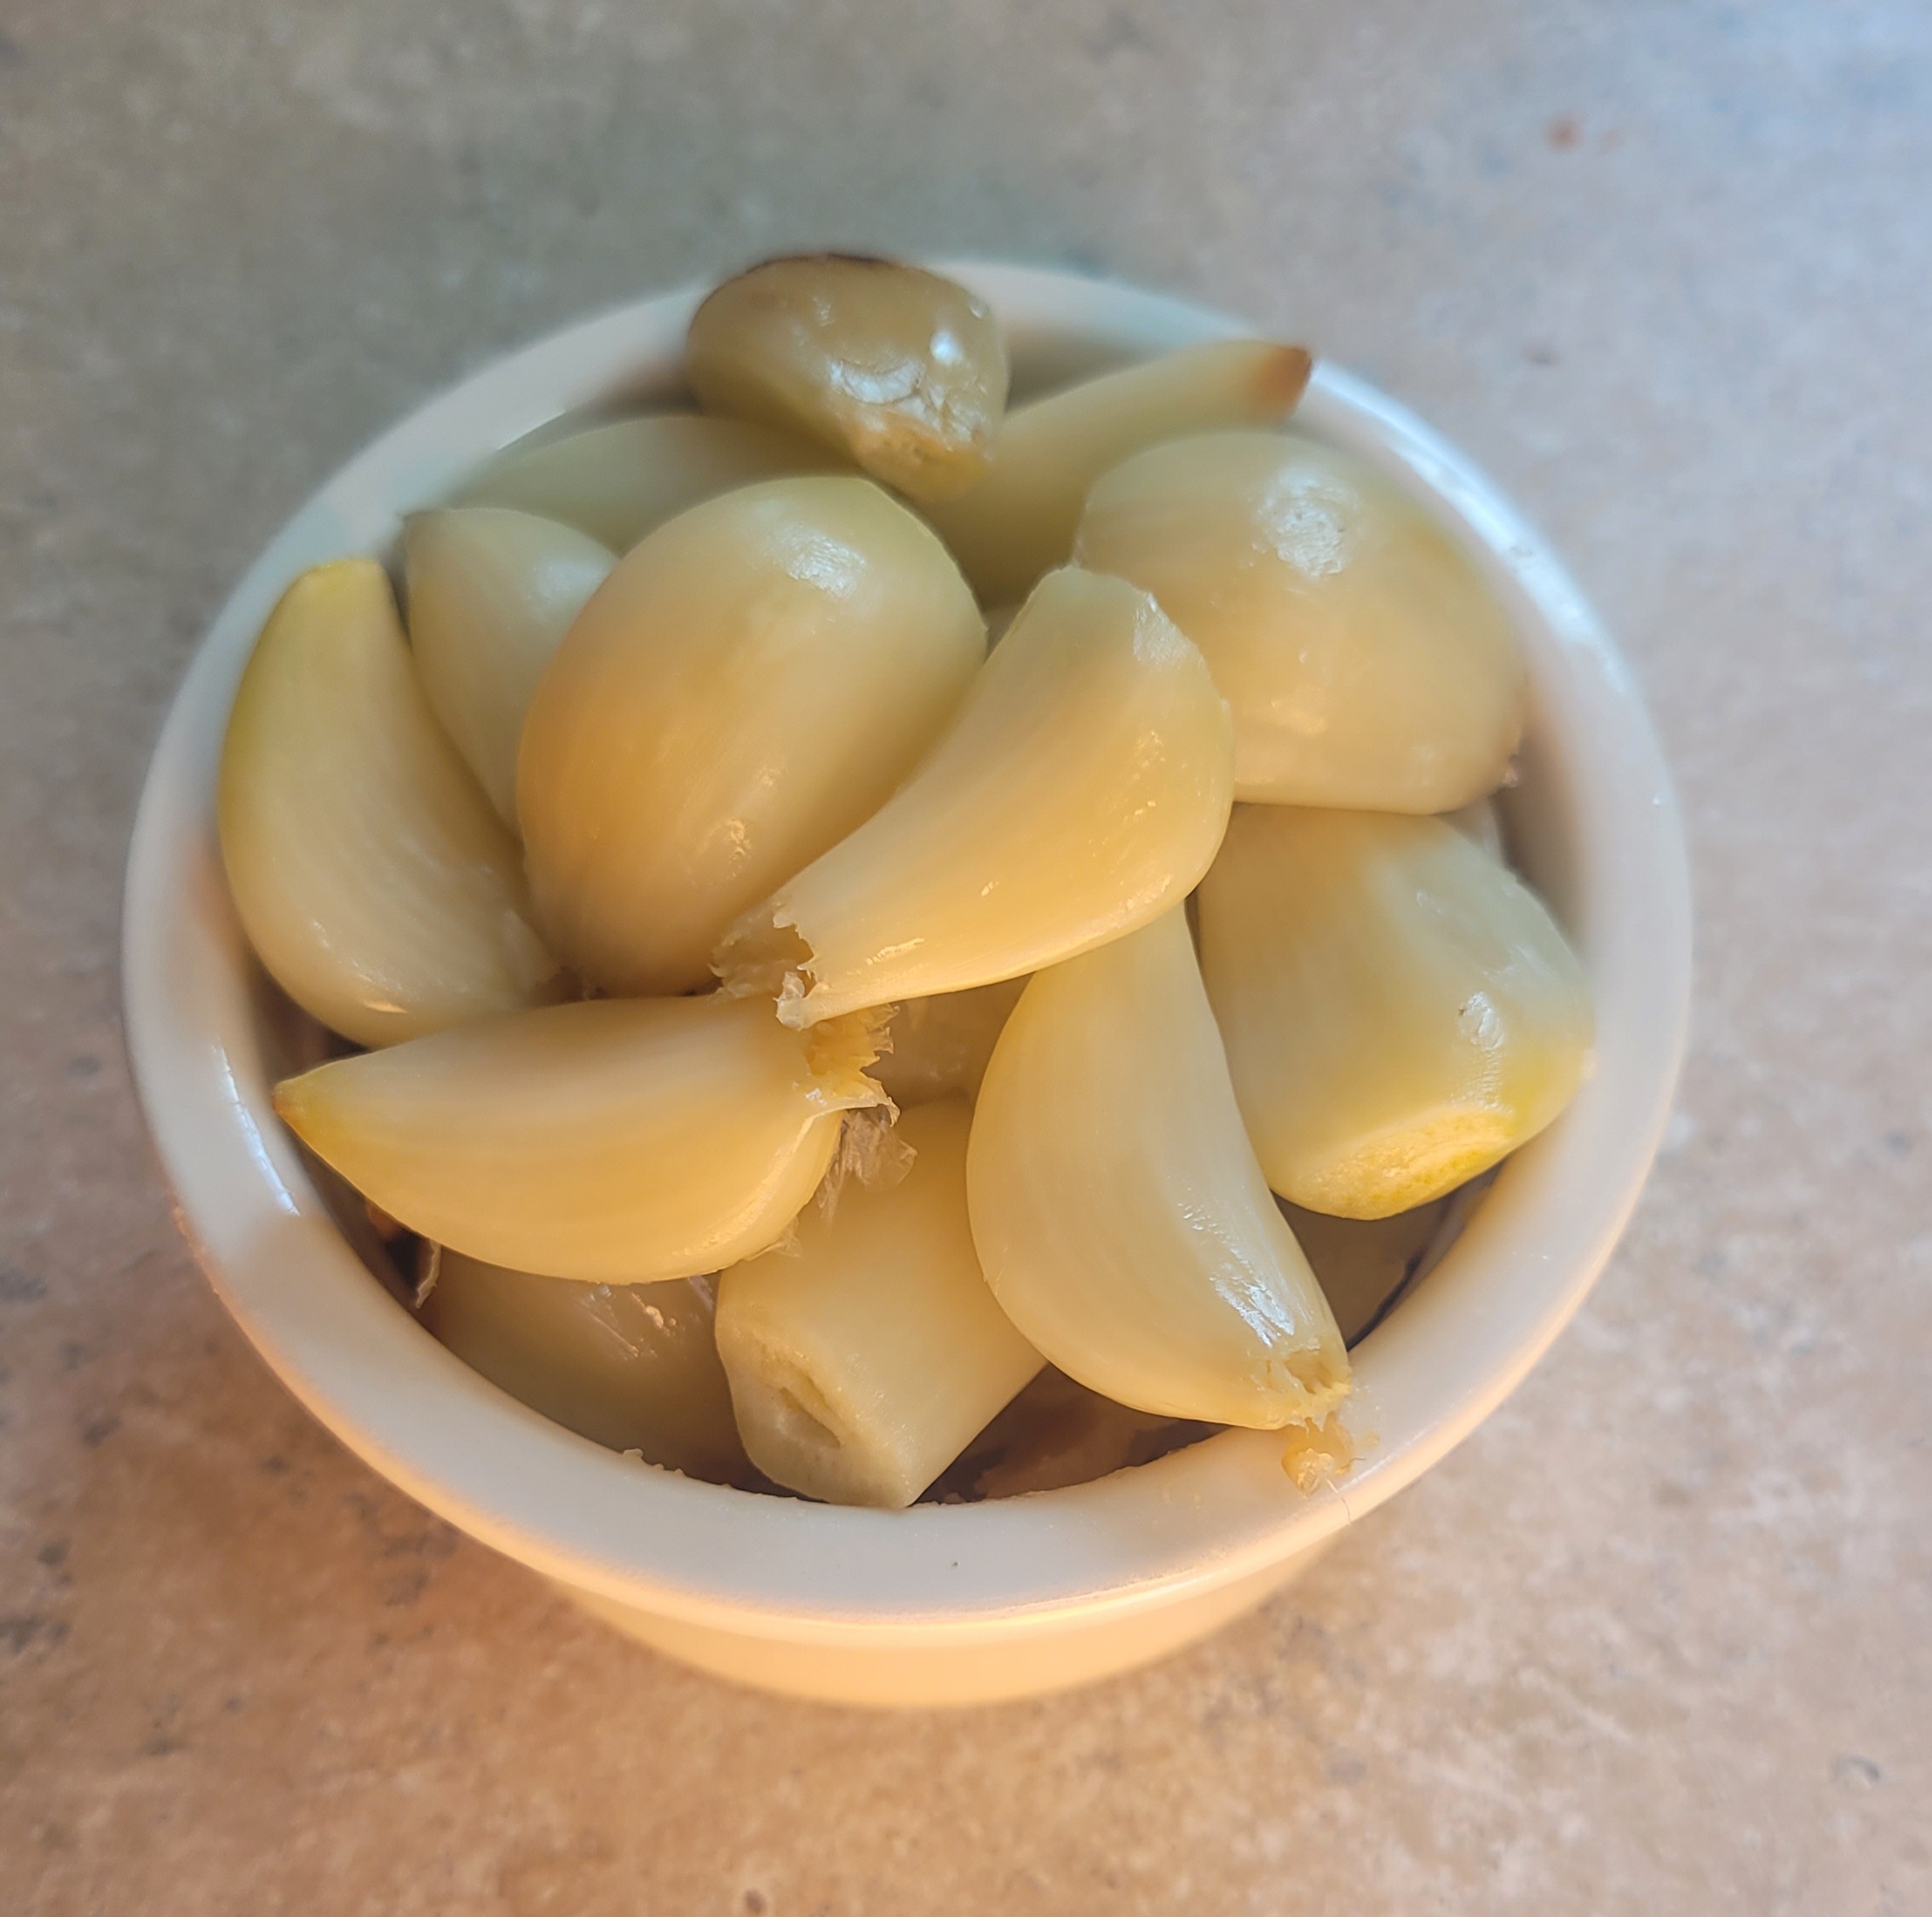 Roasted Garlic in the Oven or Air Fryer, Challenge #14